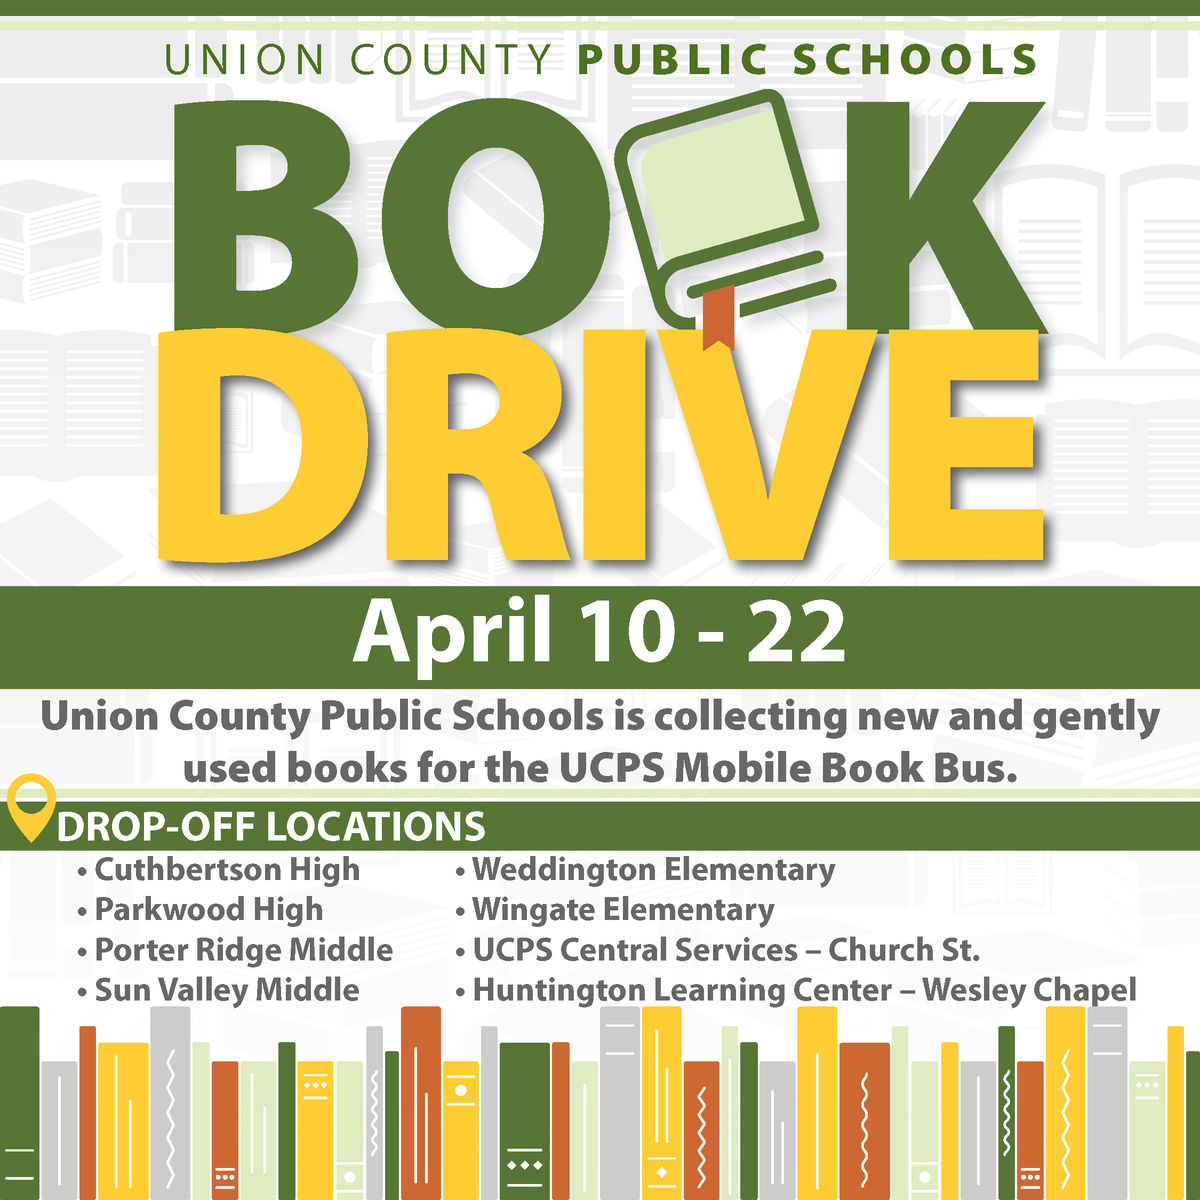 The Book Drive is live! We are collecting new and gently used books for the #UCPS Mobile Book Bus now through April 22. The goal is to help students improve their literacy skills over the summer. See the graphic for drop-off locations! @AGHoulihan